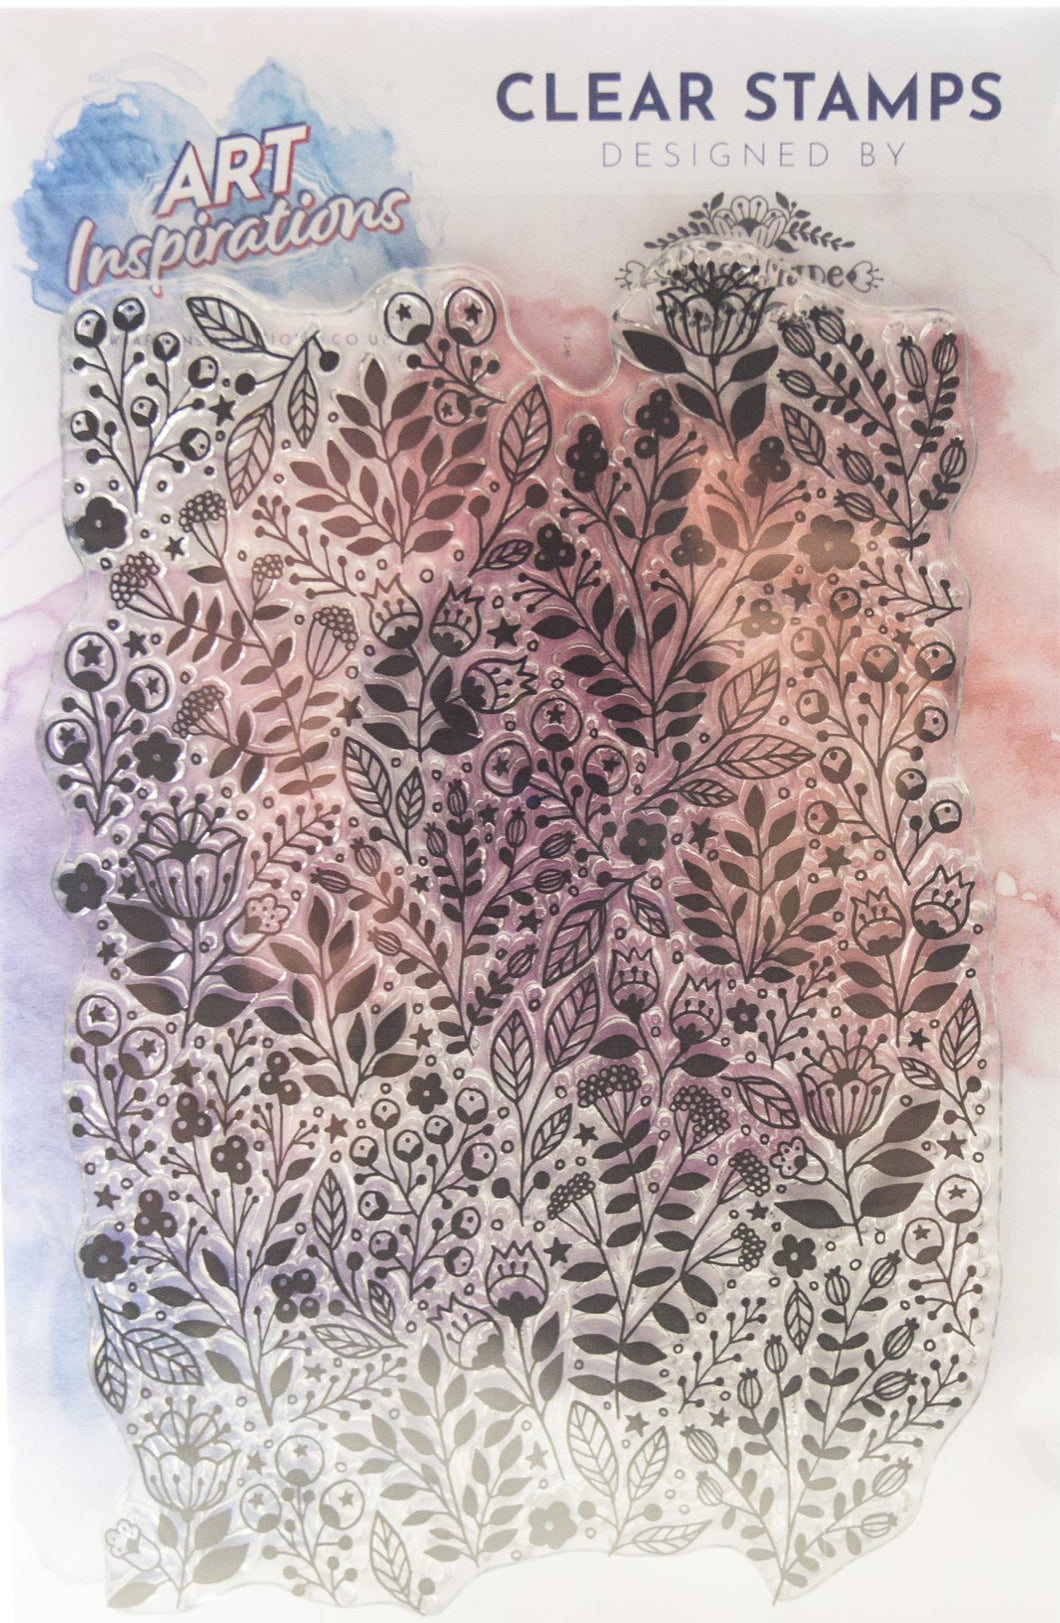 Art Inspirations by Wensdi Made A5 Clear Stamp Sheet - Floral Foliage Background - 1 Stamp